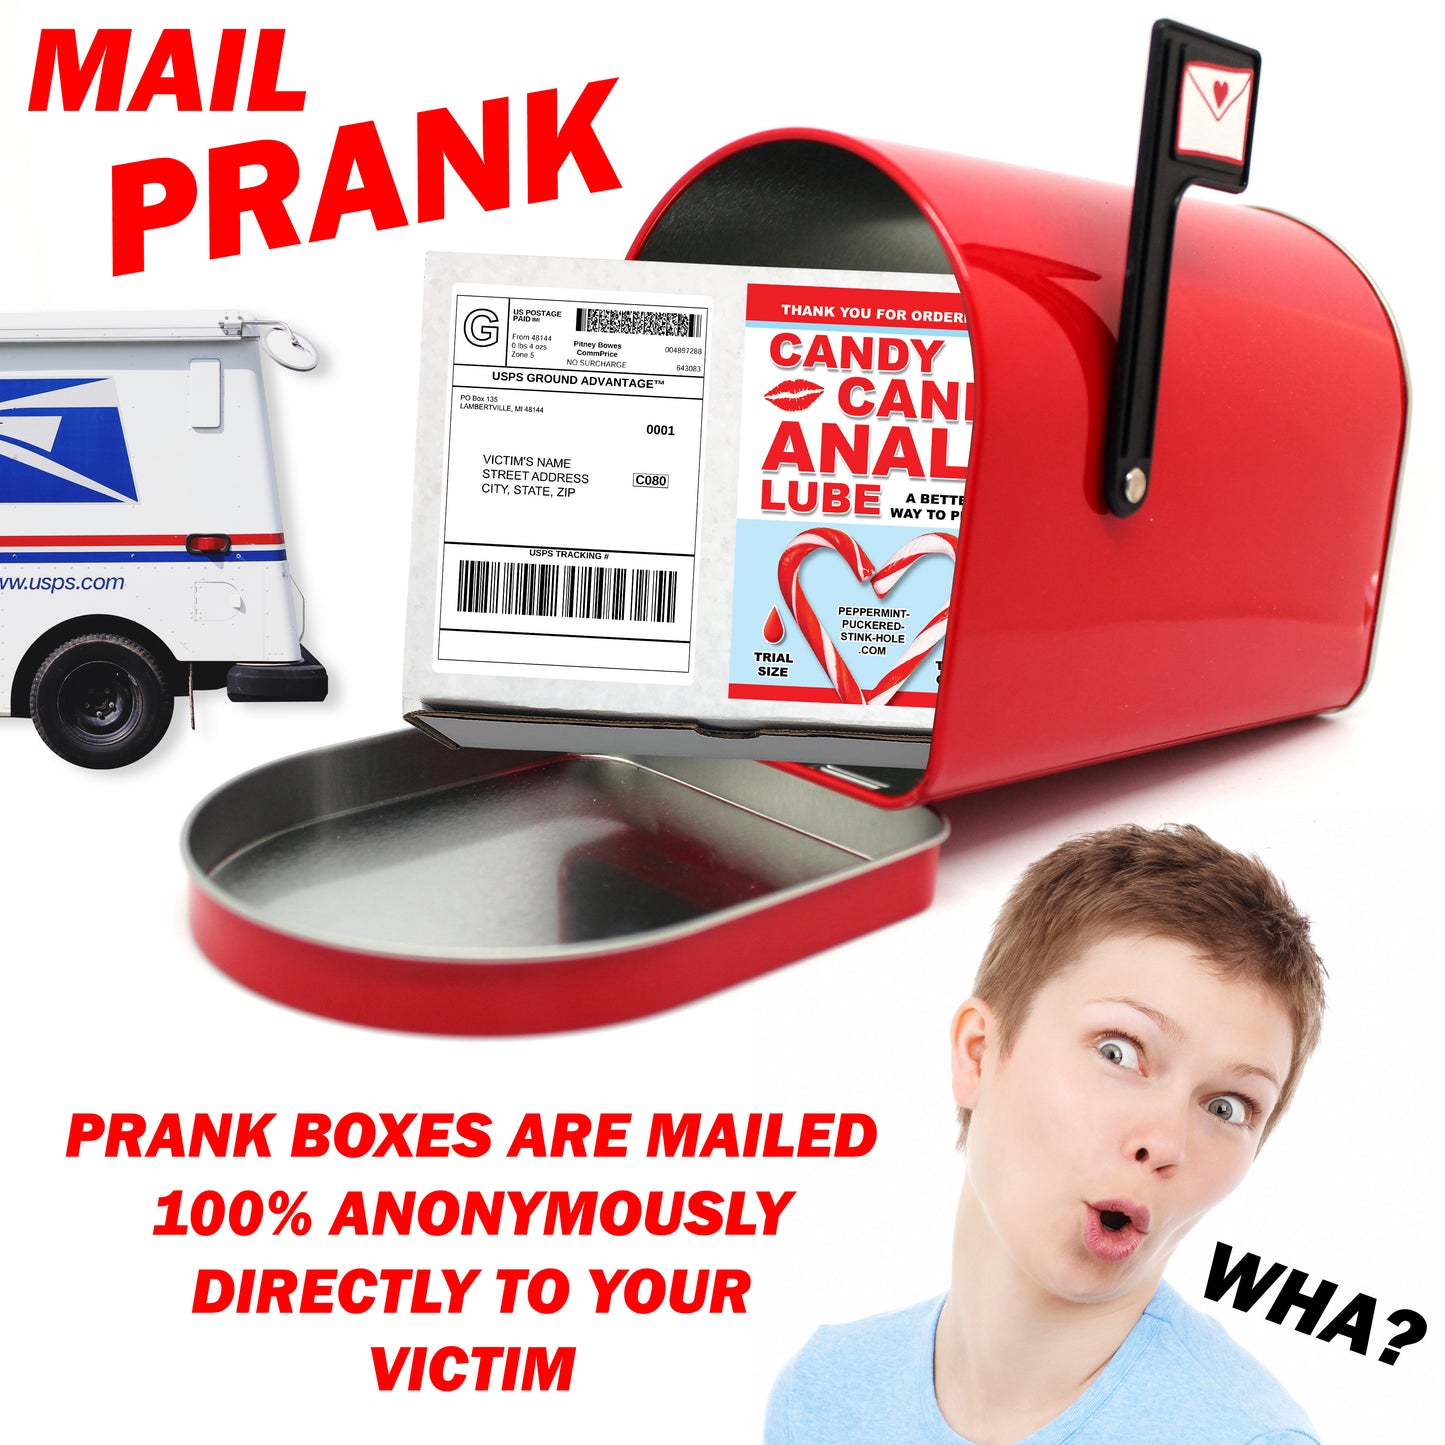 Candy Cane Anal Lube Holiday Prank Mail